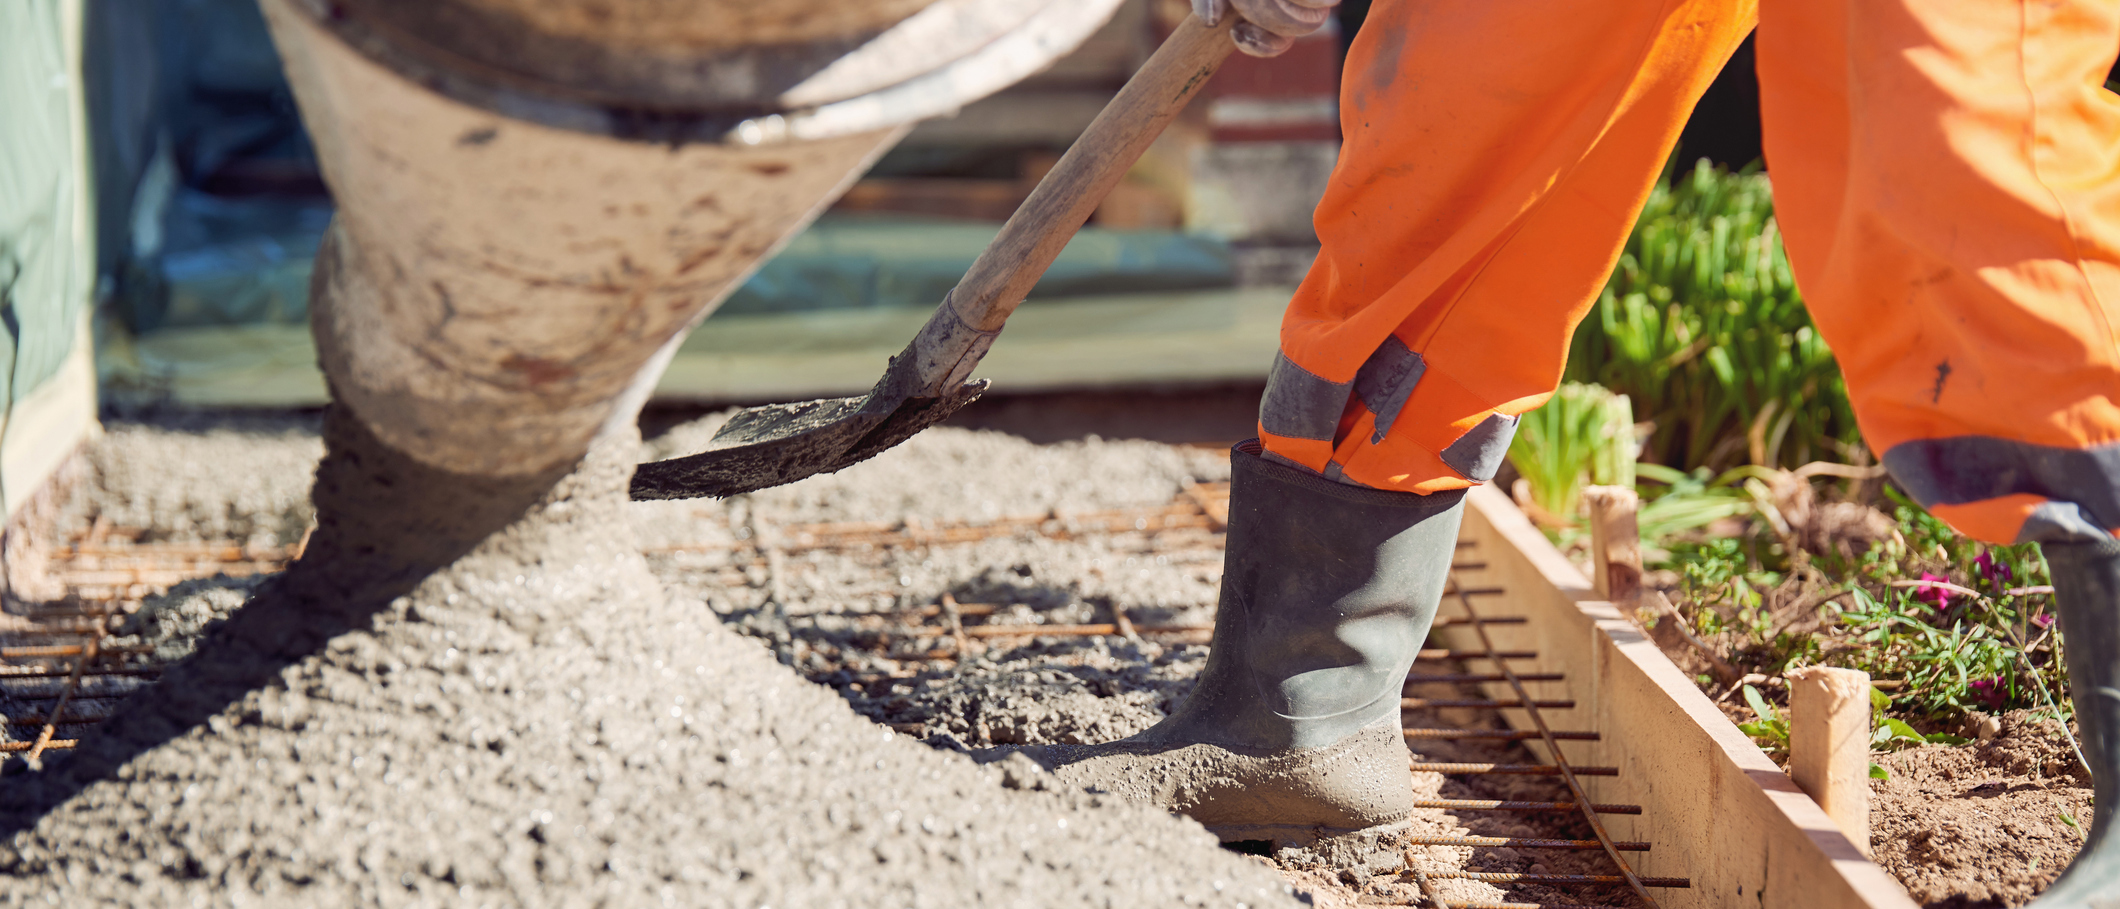 Worker with gum boots spreading ready mix concrete